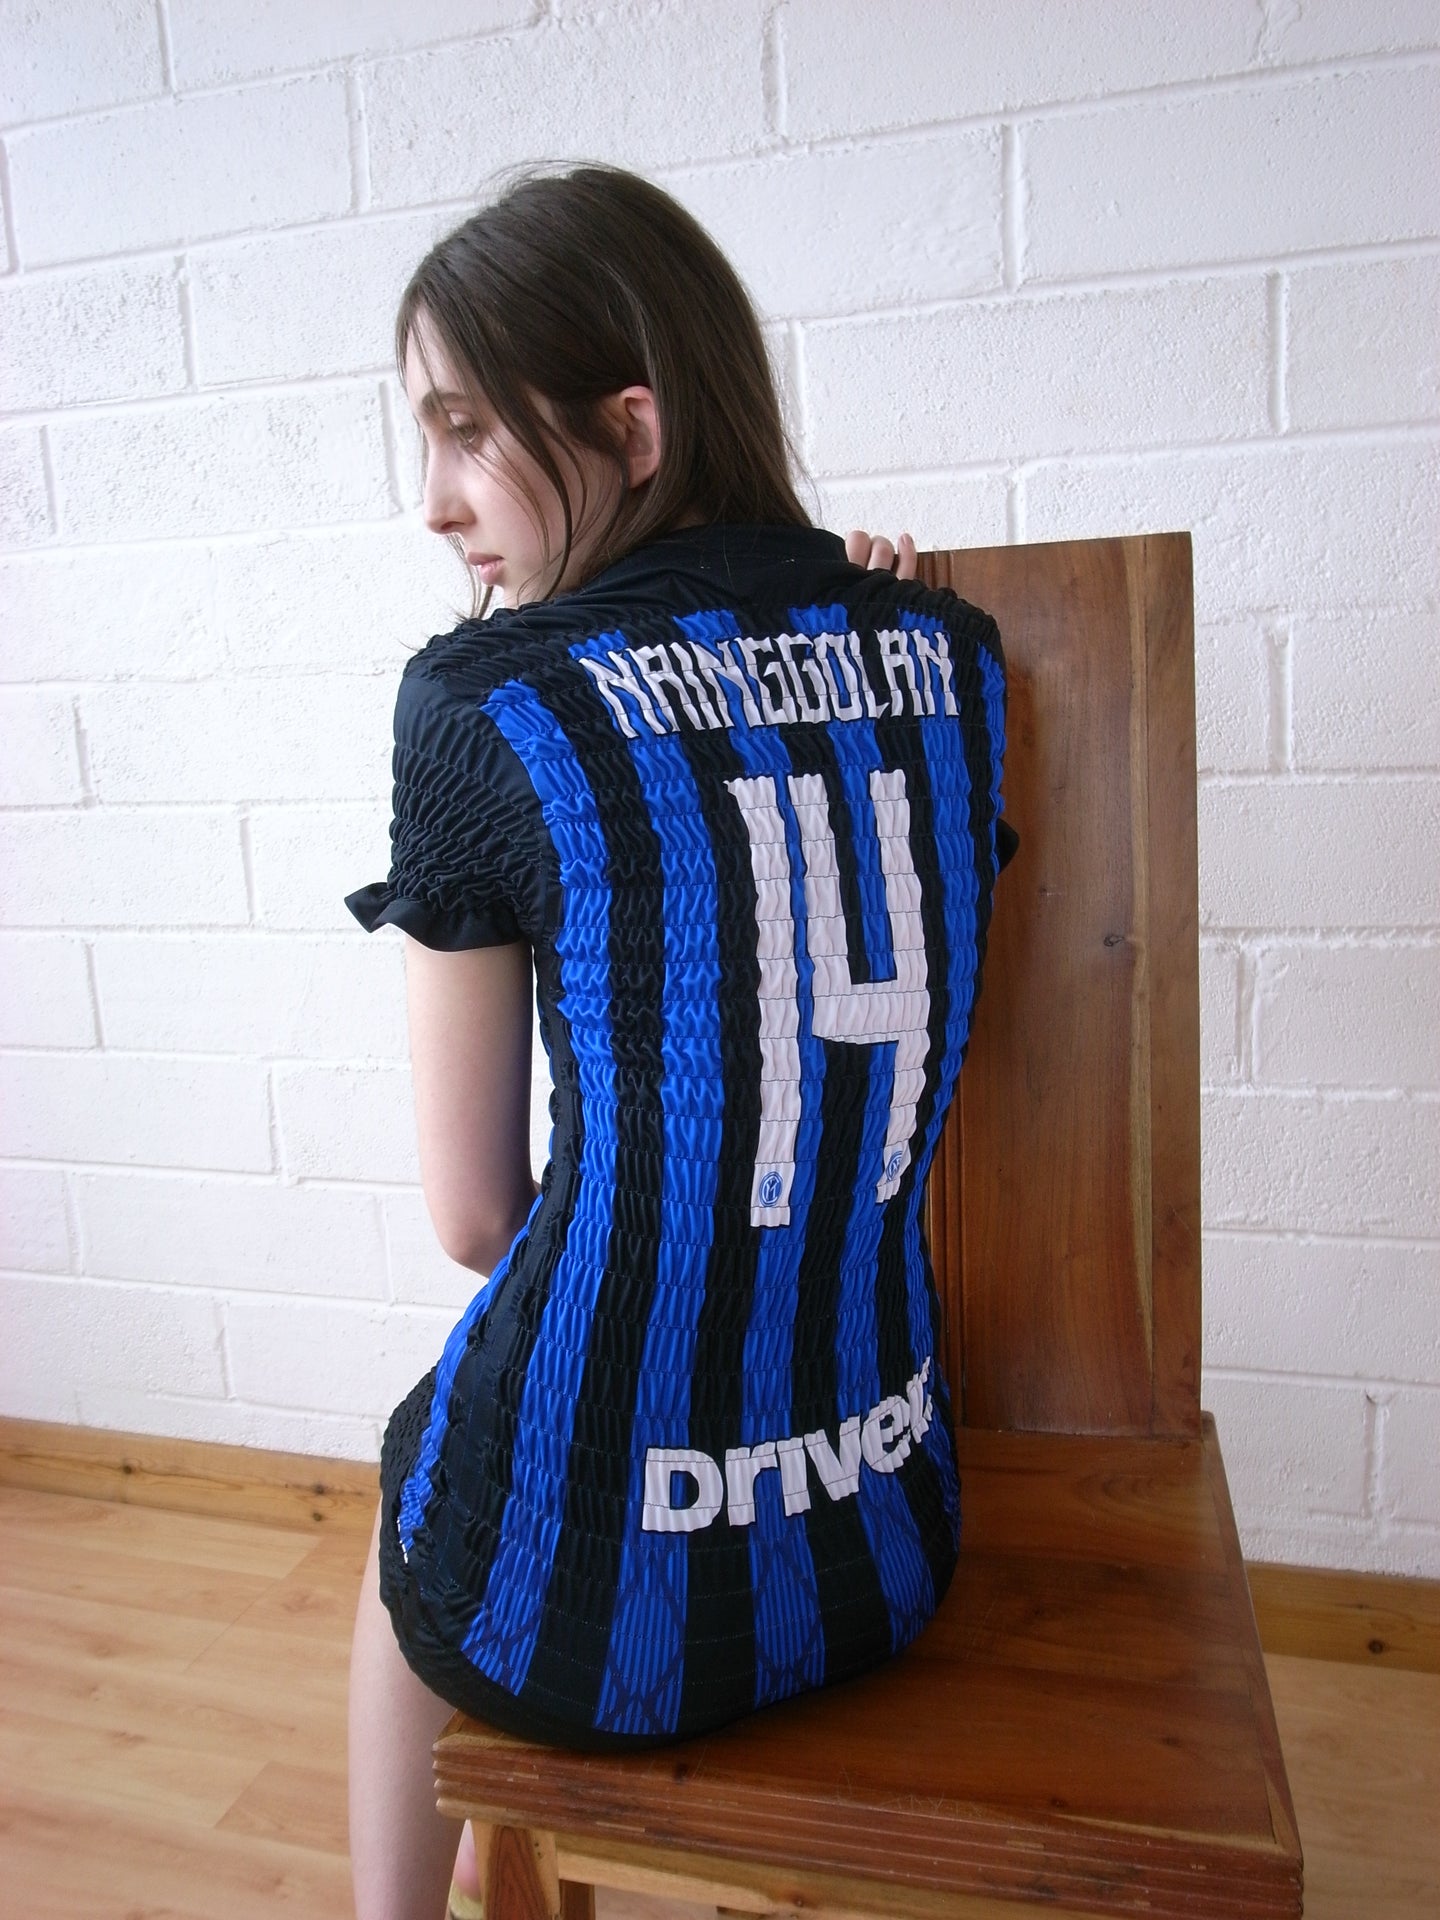 The Reconstituted Shirred Football Dress